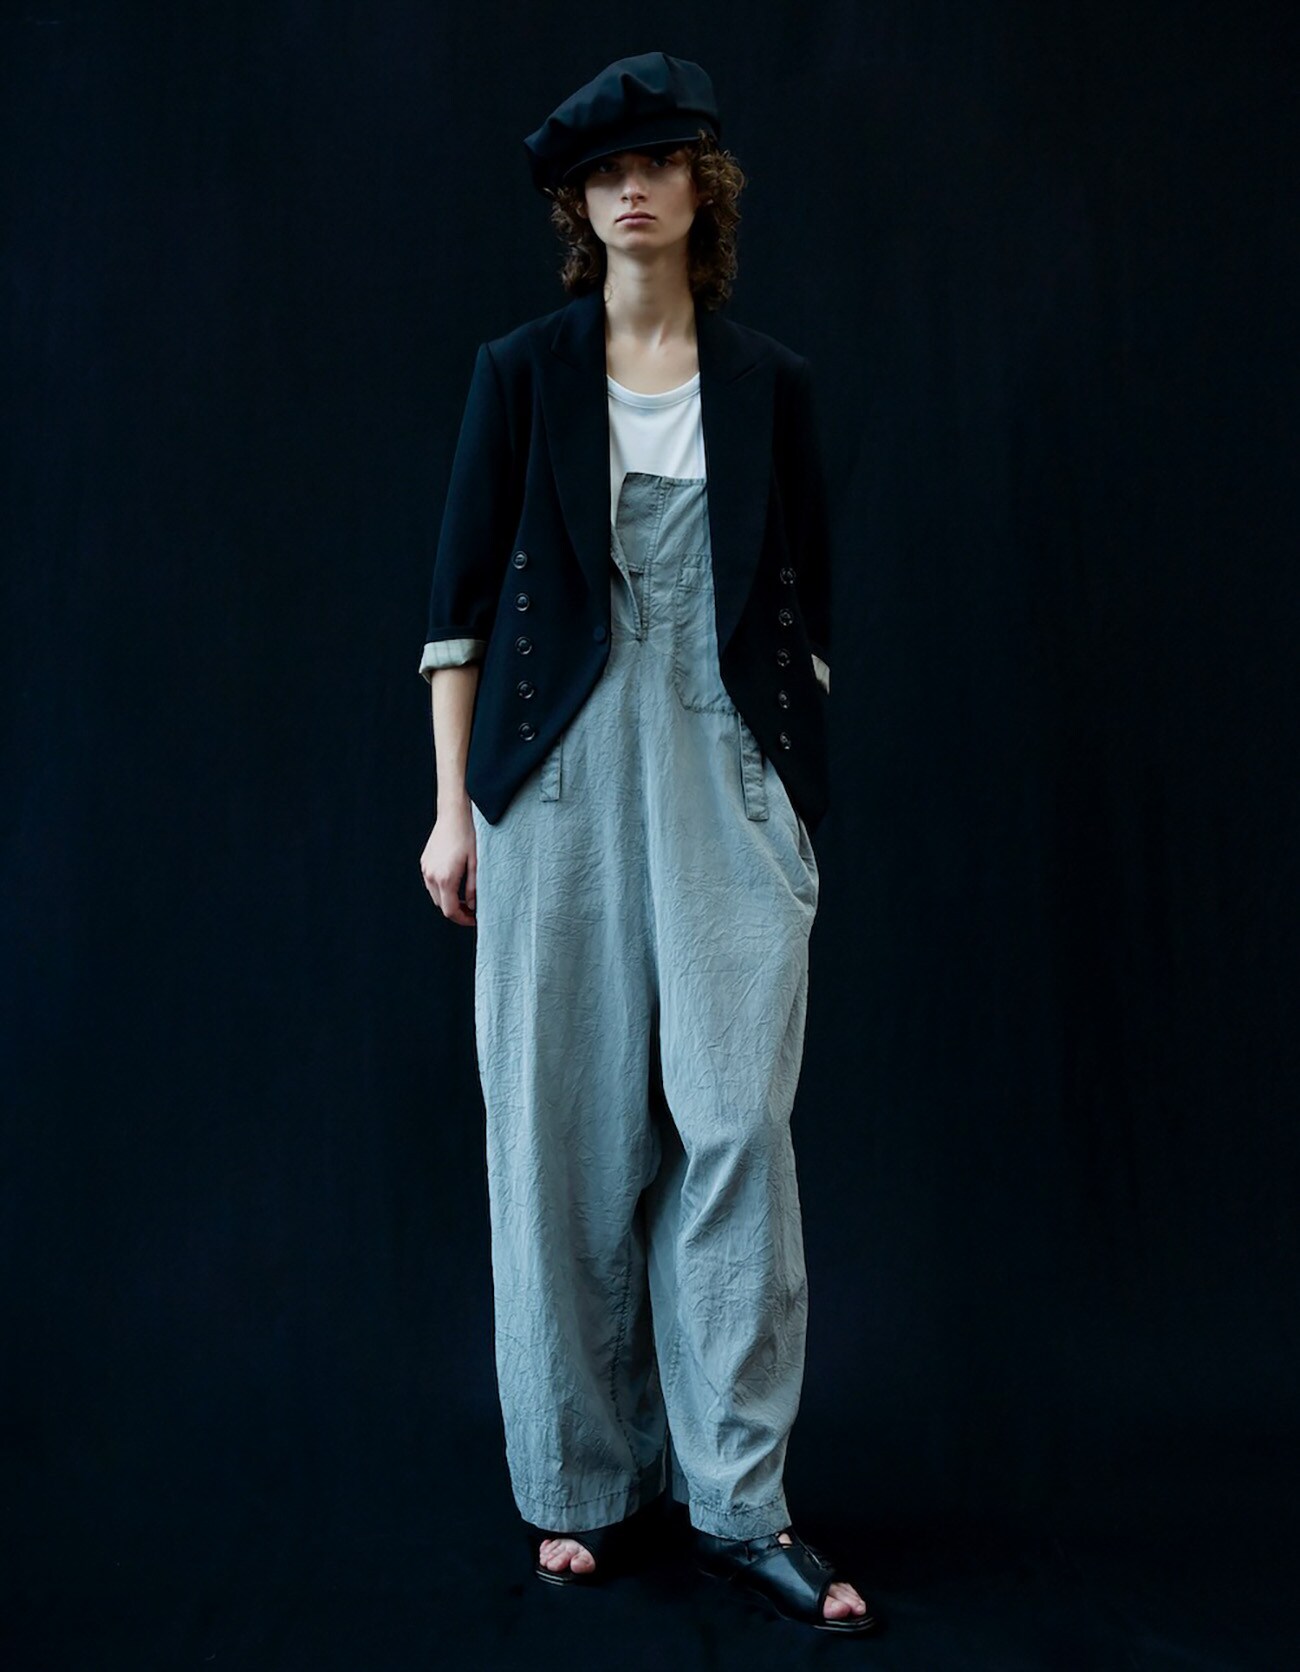 CUPRA COTTON PIGMENT-DYED WRINKLED LAWN OVERALLS